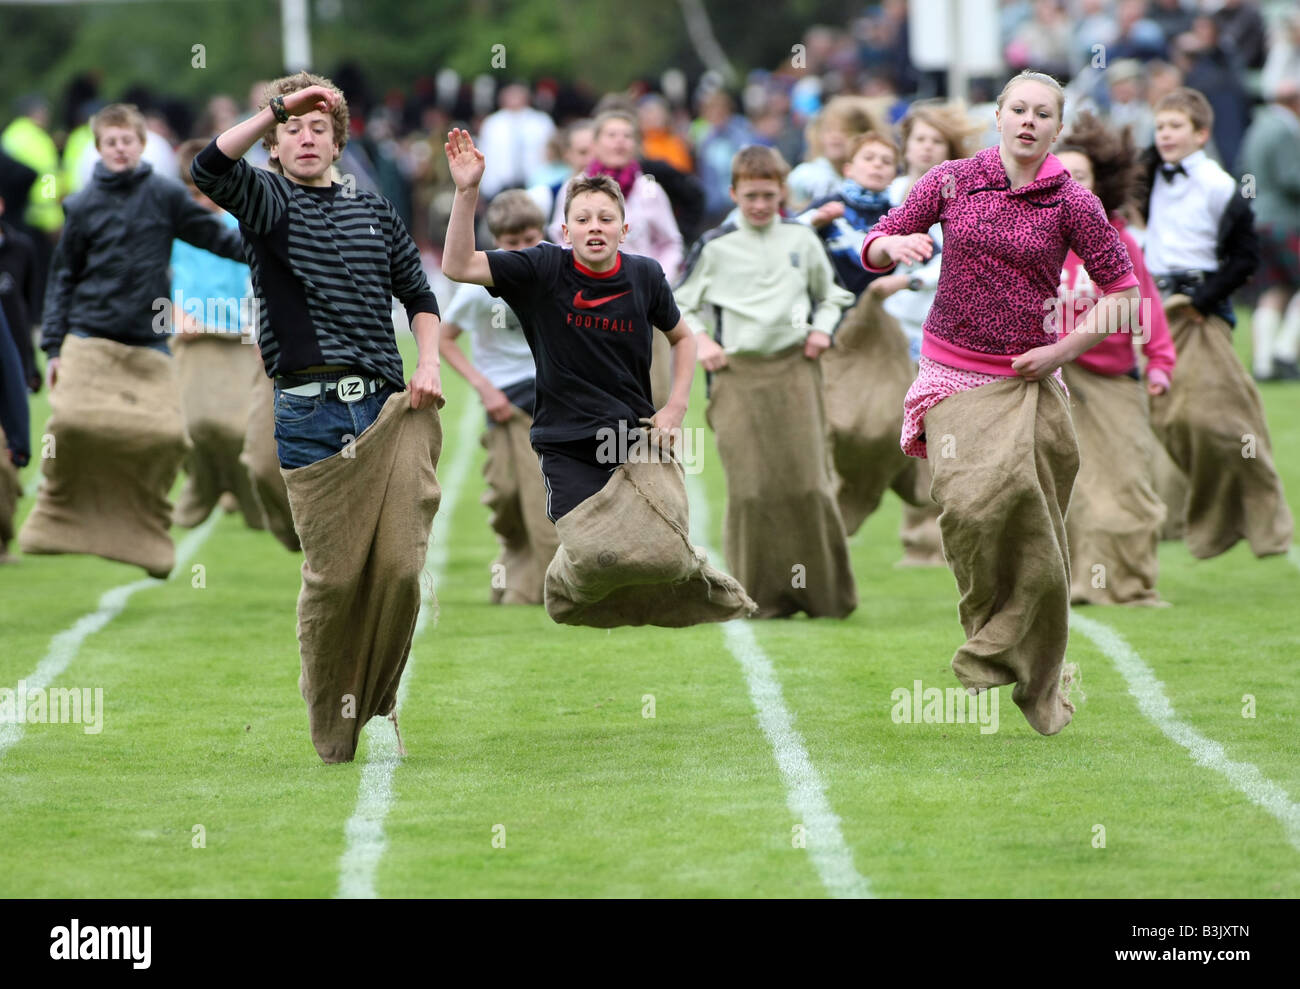 Children competing in an old fashioned traditional sack race in the UK Stock Photo